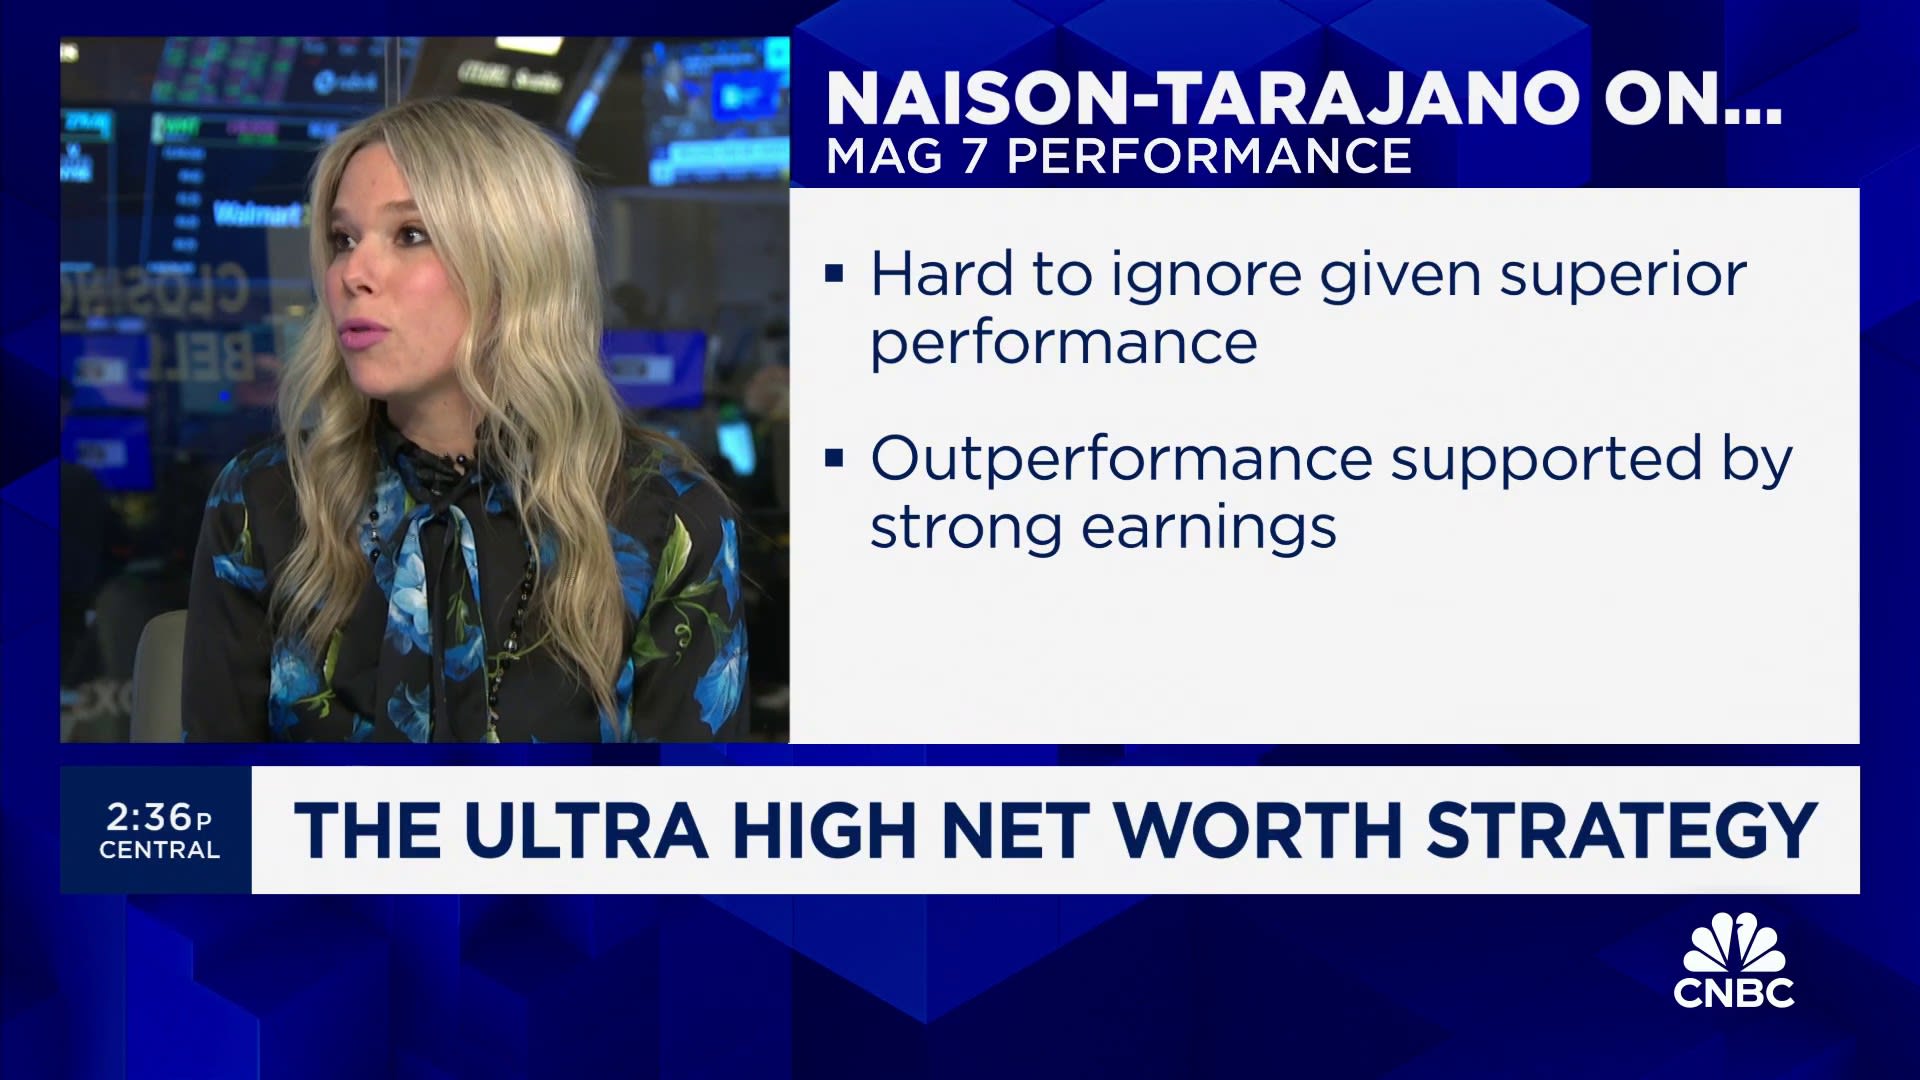 Goldman’s Sara Naison-Tarajano: Tremendous amount of growth in the market has come from ‘Mag 7’ [Video]